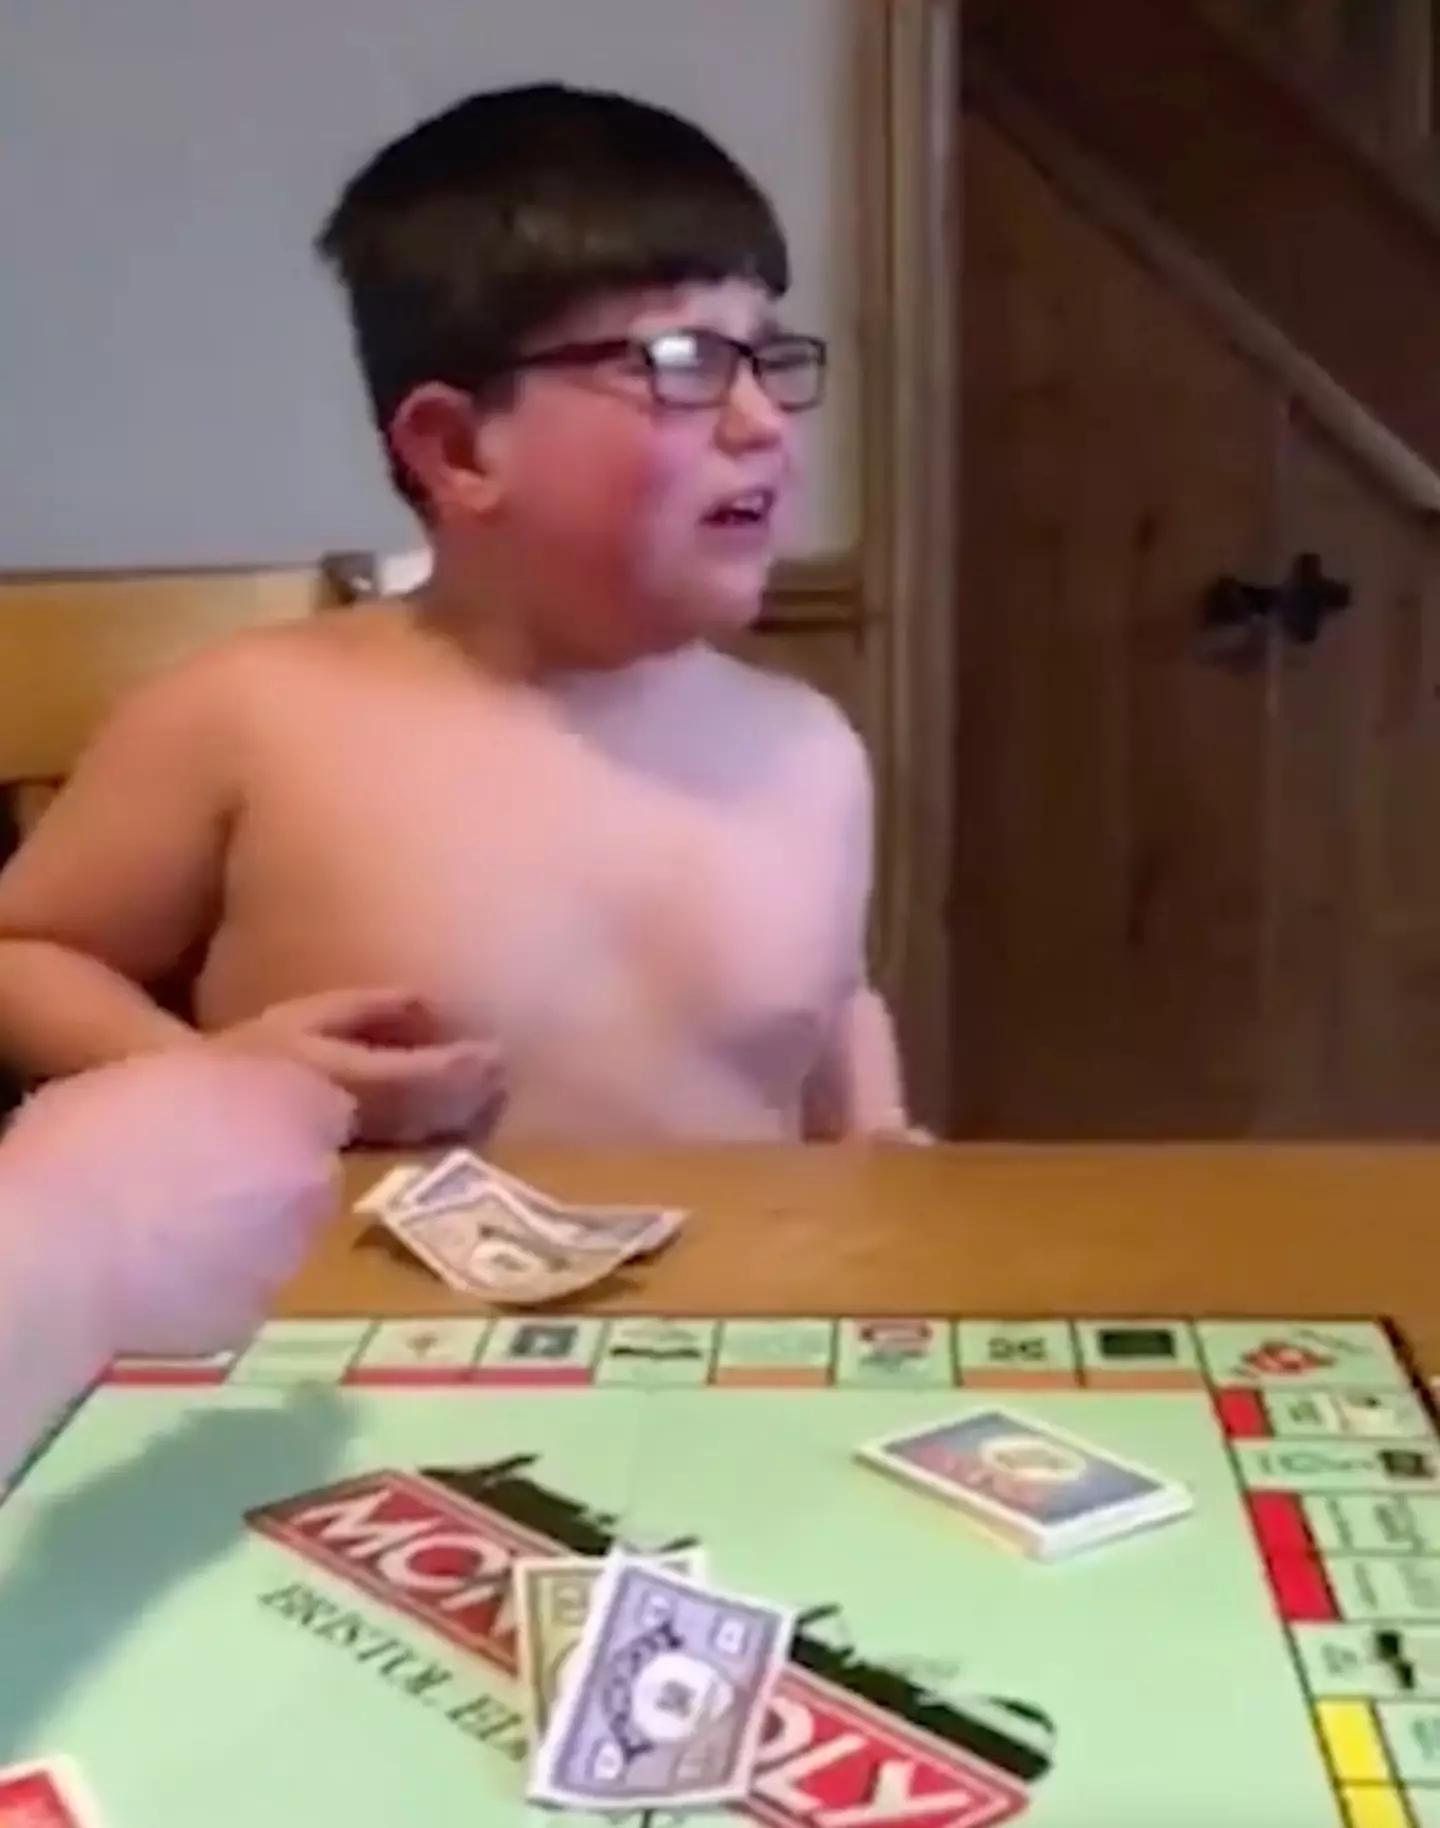 After seven years, the Angry Monopoly kid has finally opened up on that viral Christmas video, saying he 'hasn't played it since'.